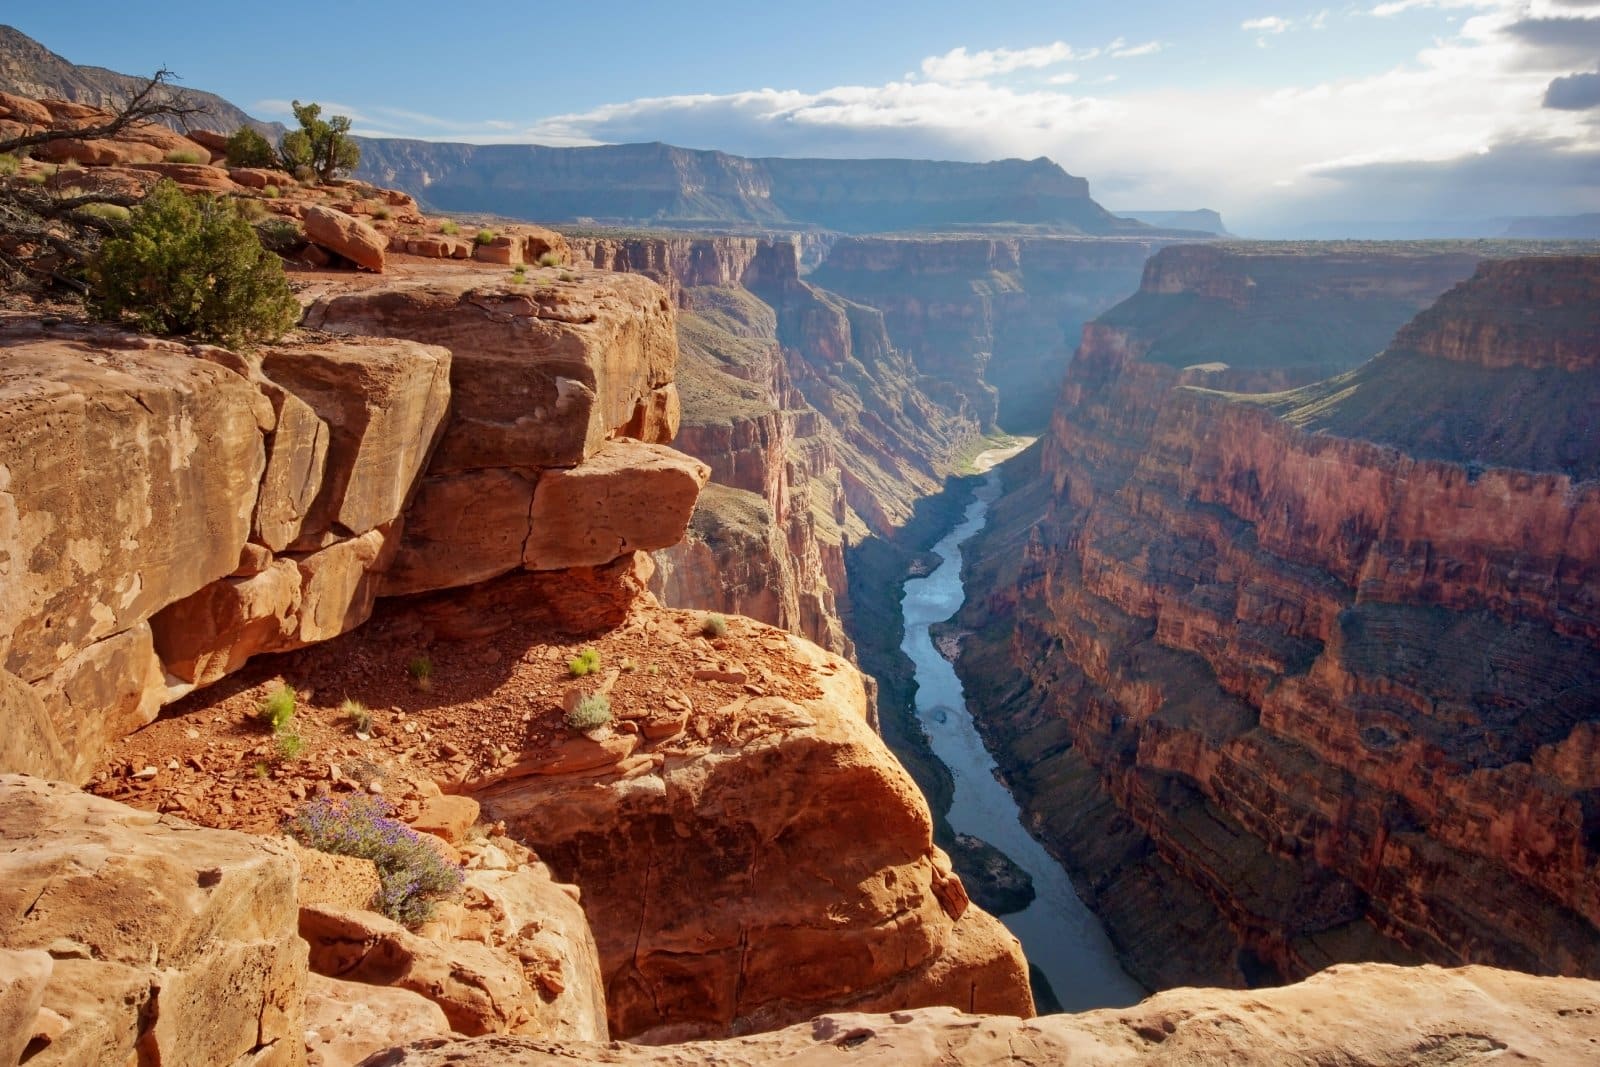 <p>Tourism brings Arizona around $24 billion annually, with the Grand Canyon charging $35 per vehicle for a seven-day pass.</p>